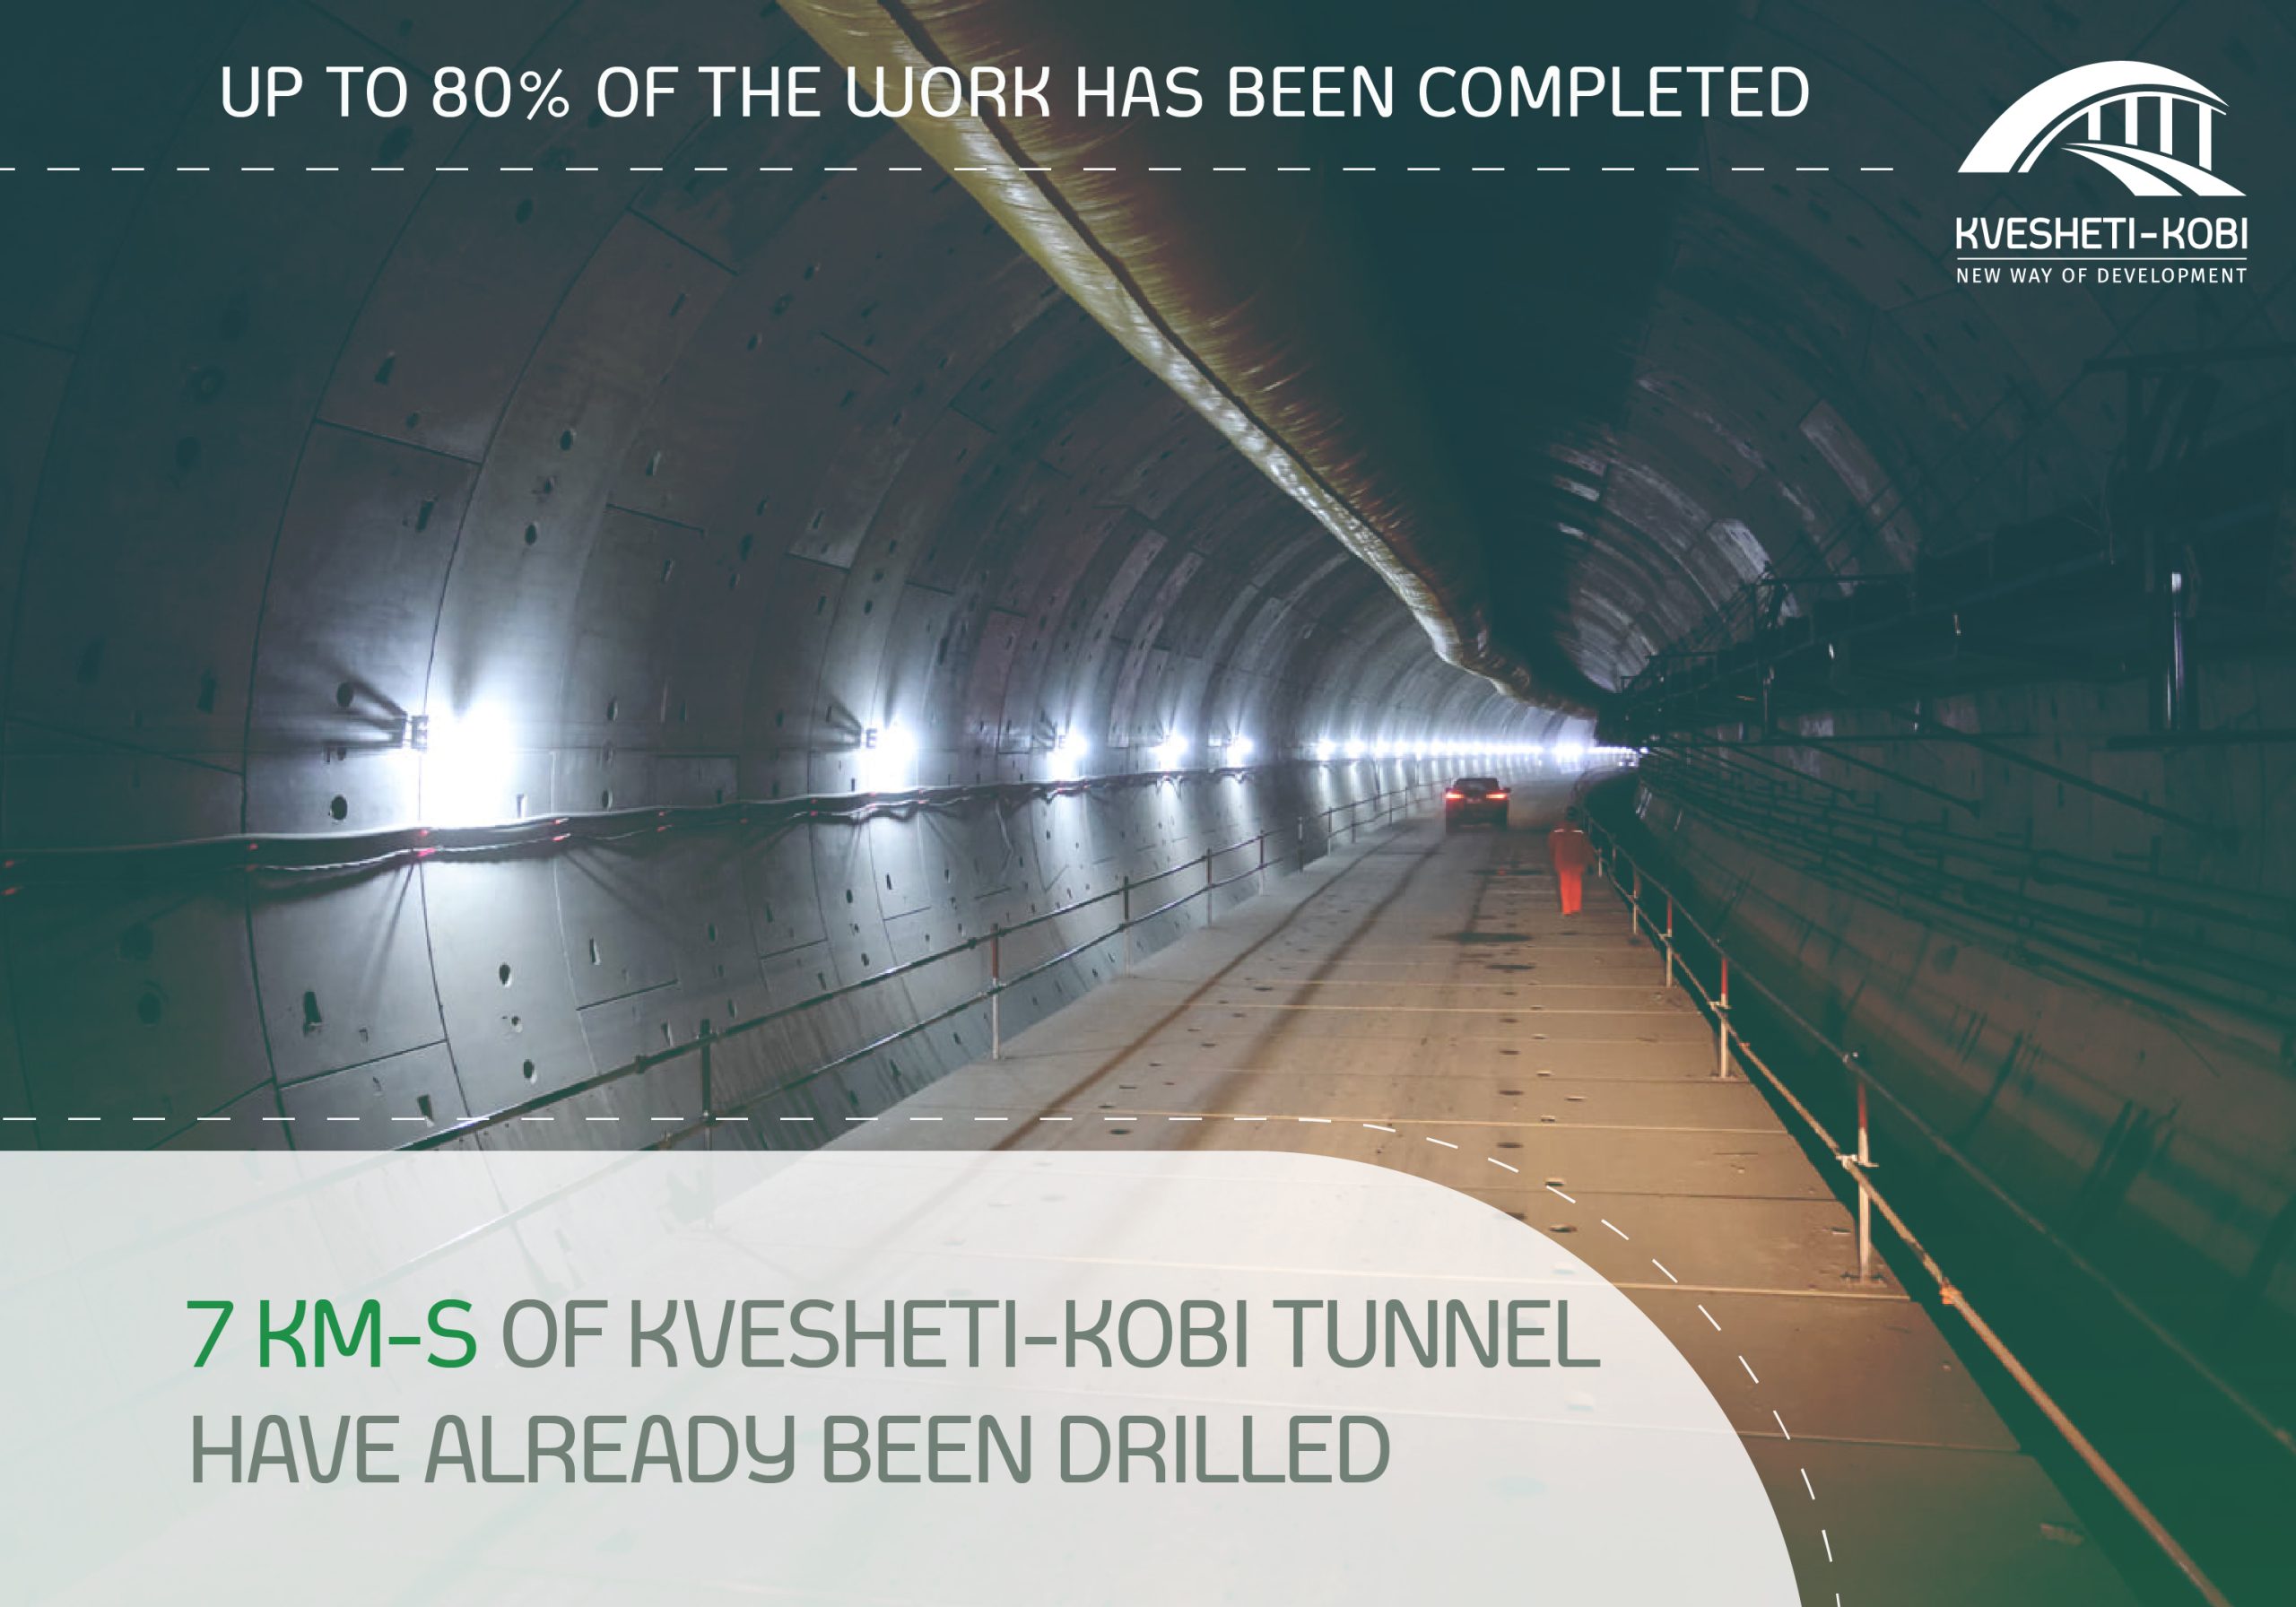 7 km of the 9 km tunnel has already been drilled!